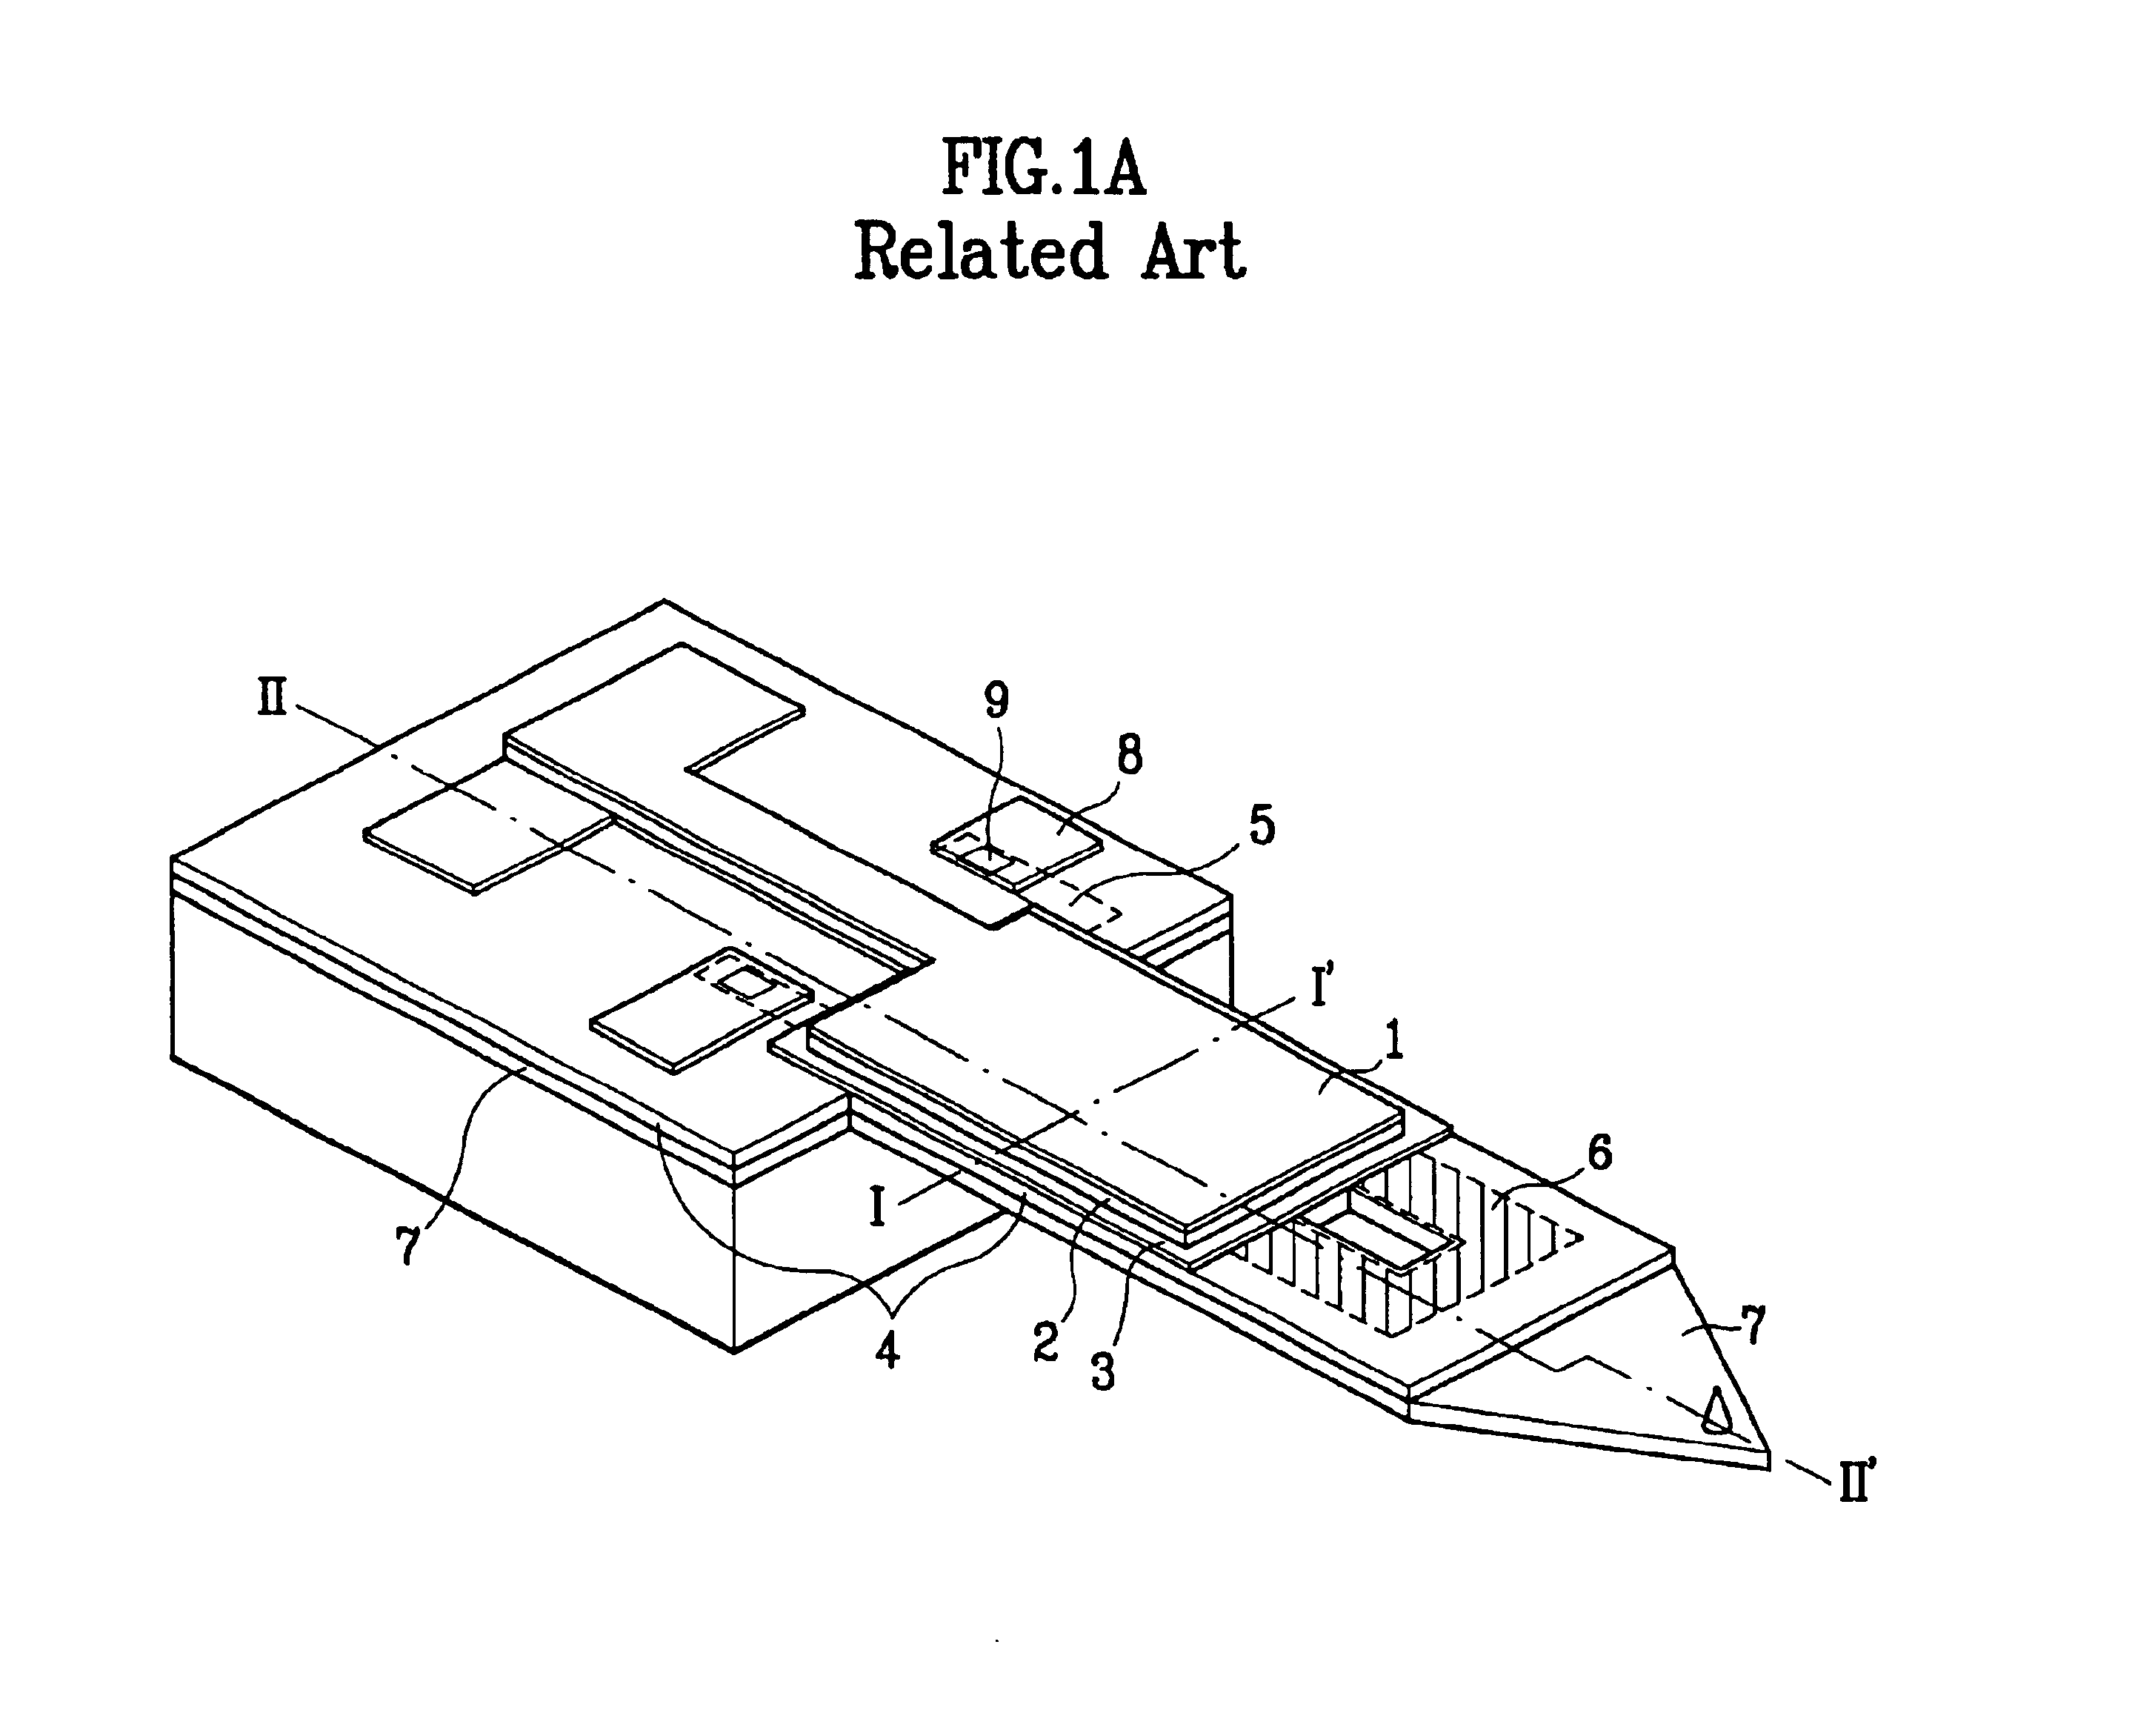 Cantilever for scanning probe microscope